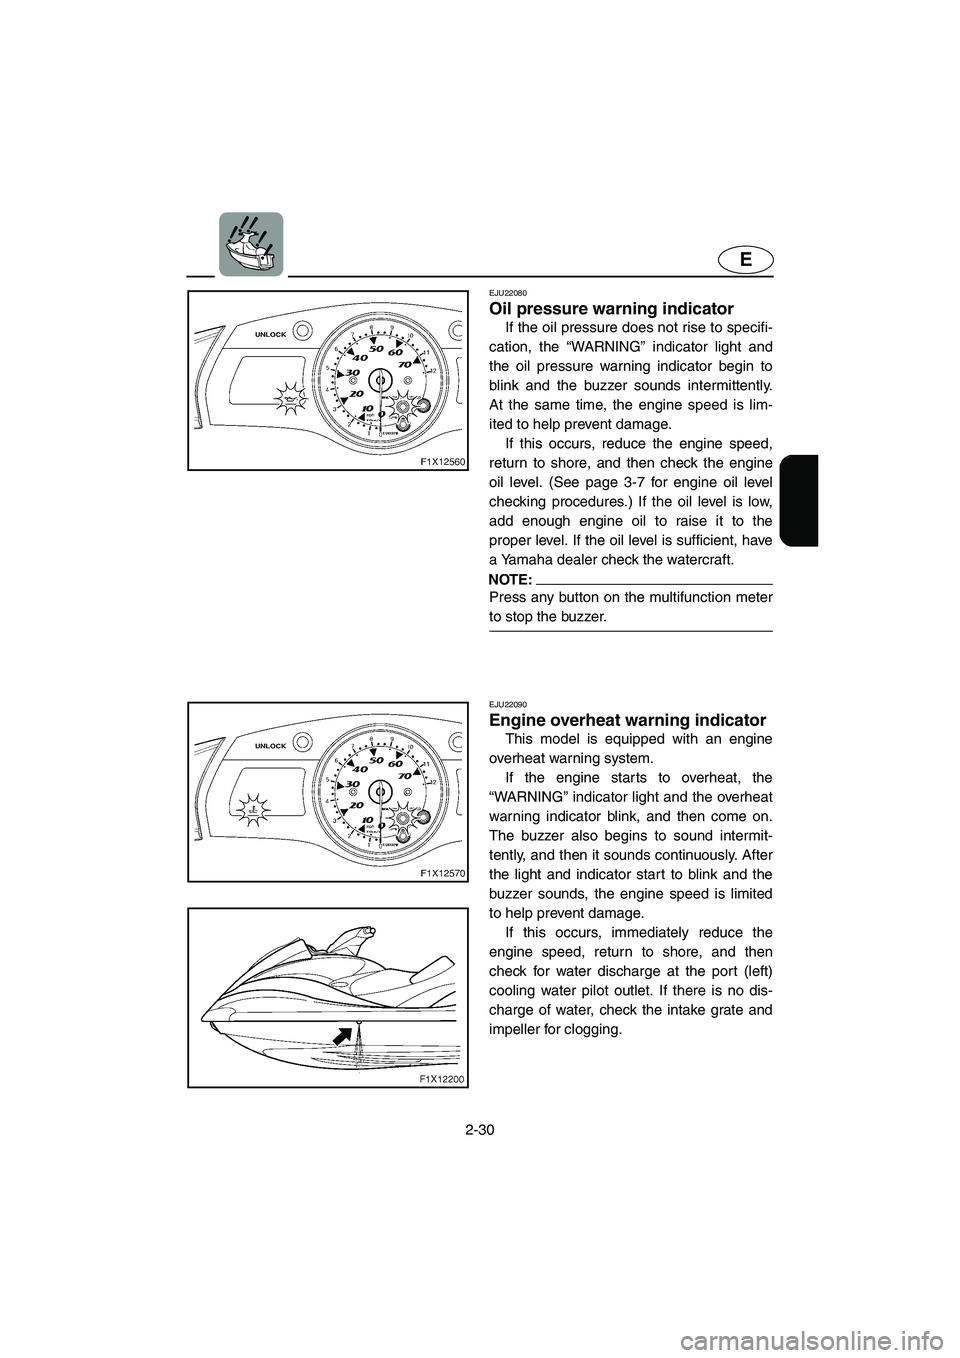 YAMAHA FX HO CRUISER 2006  Owners Manual 2-30
E
EJU22080 
Oil pressure warning indicator 
If the oil pressure does not rise to specifi-
cation, the “WARNING” indicator light and
the oil pressure warning indicator begin to
blink and the b